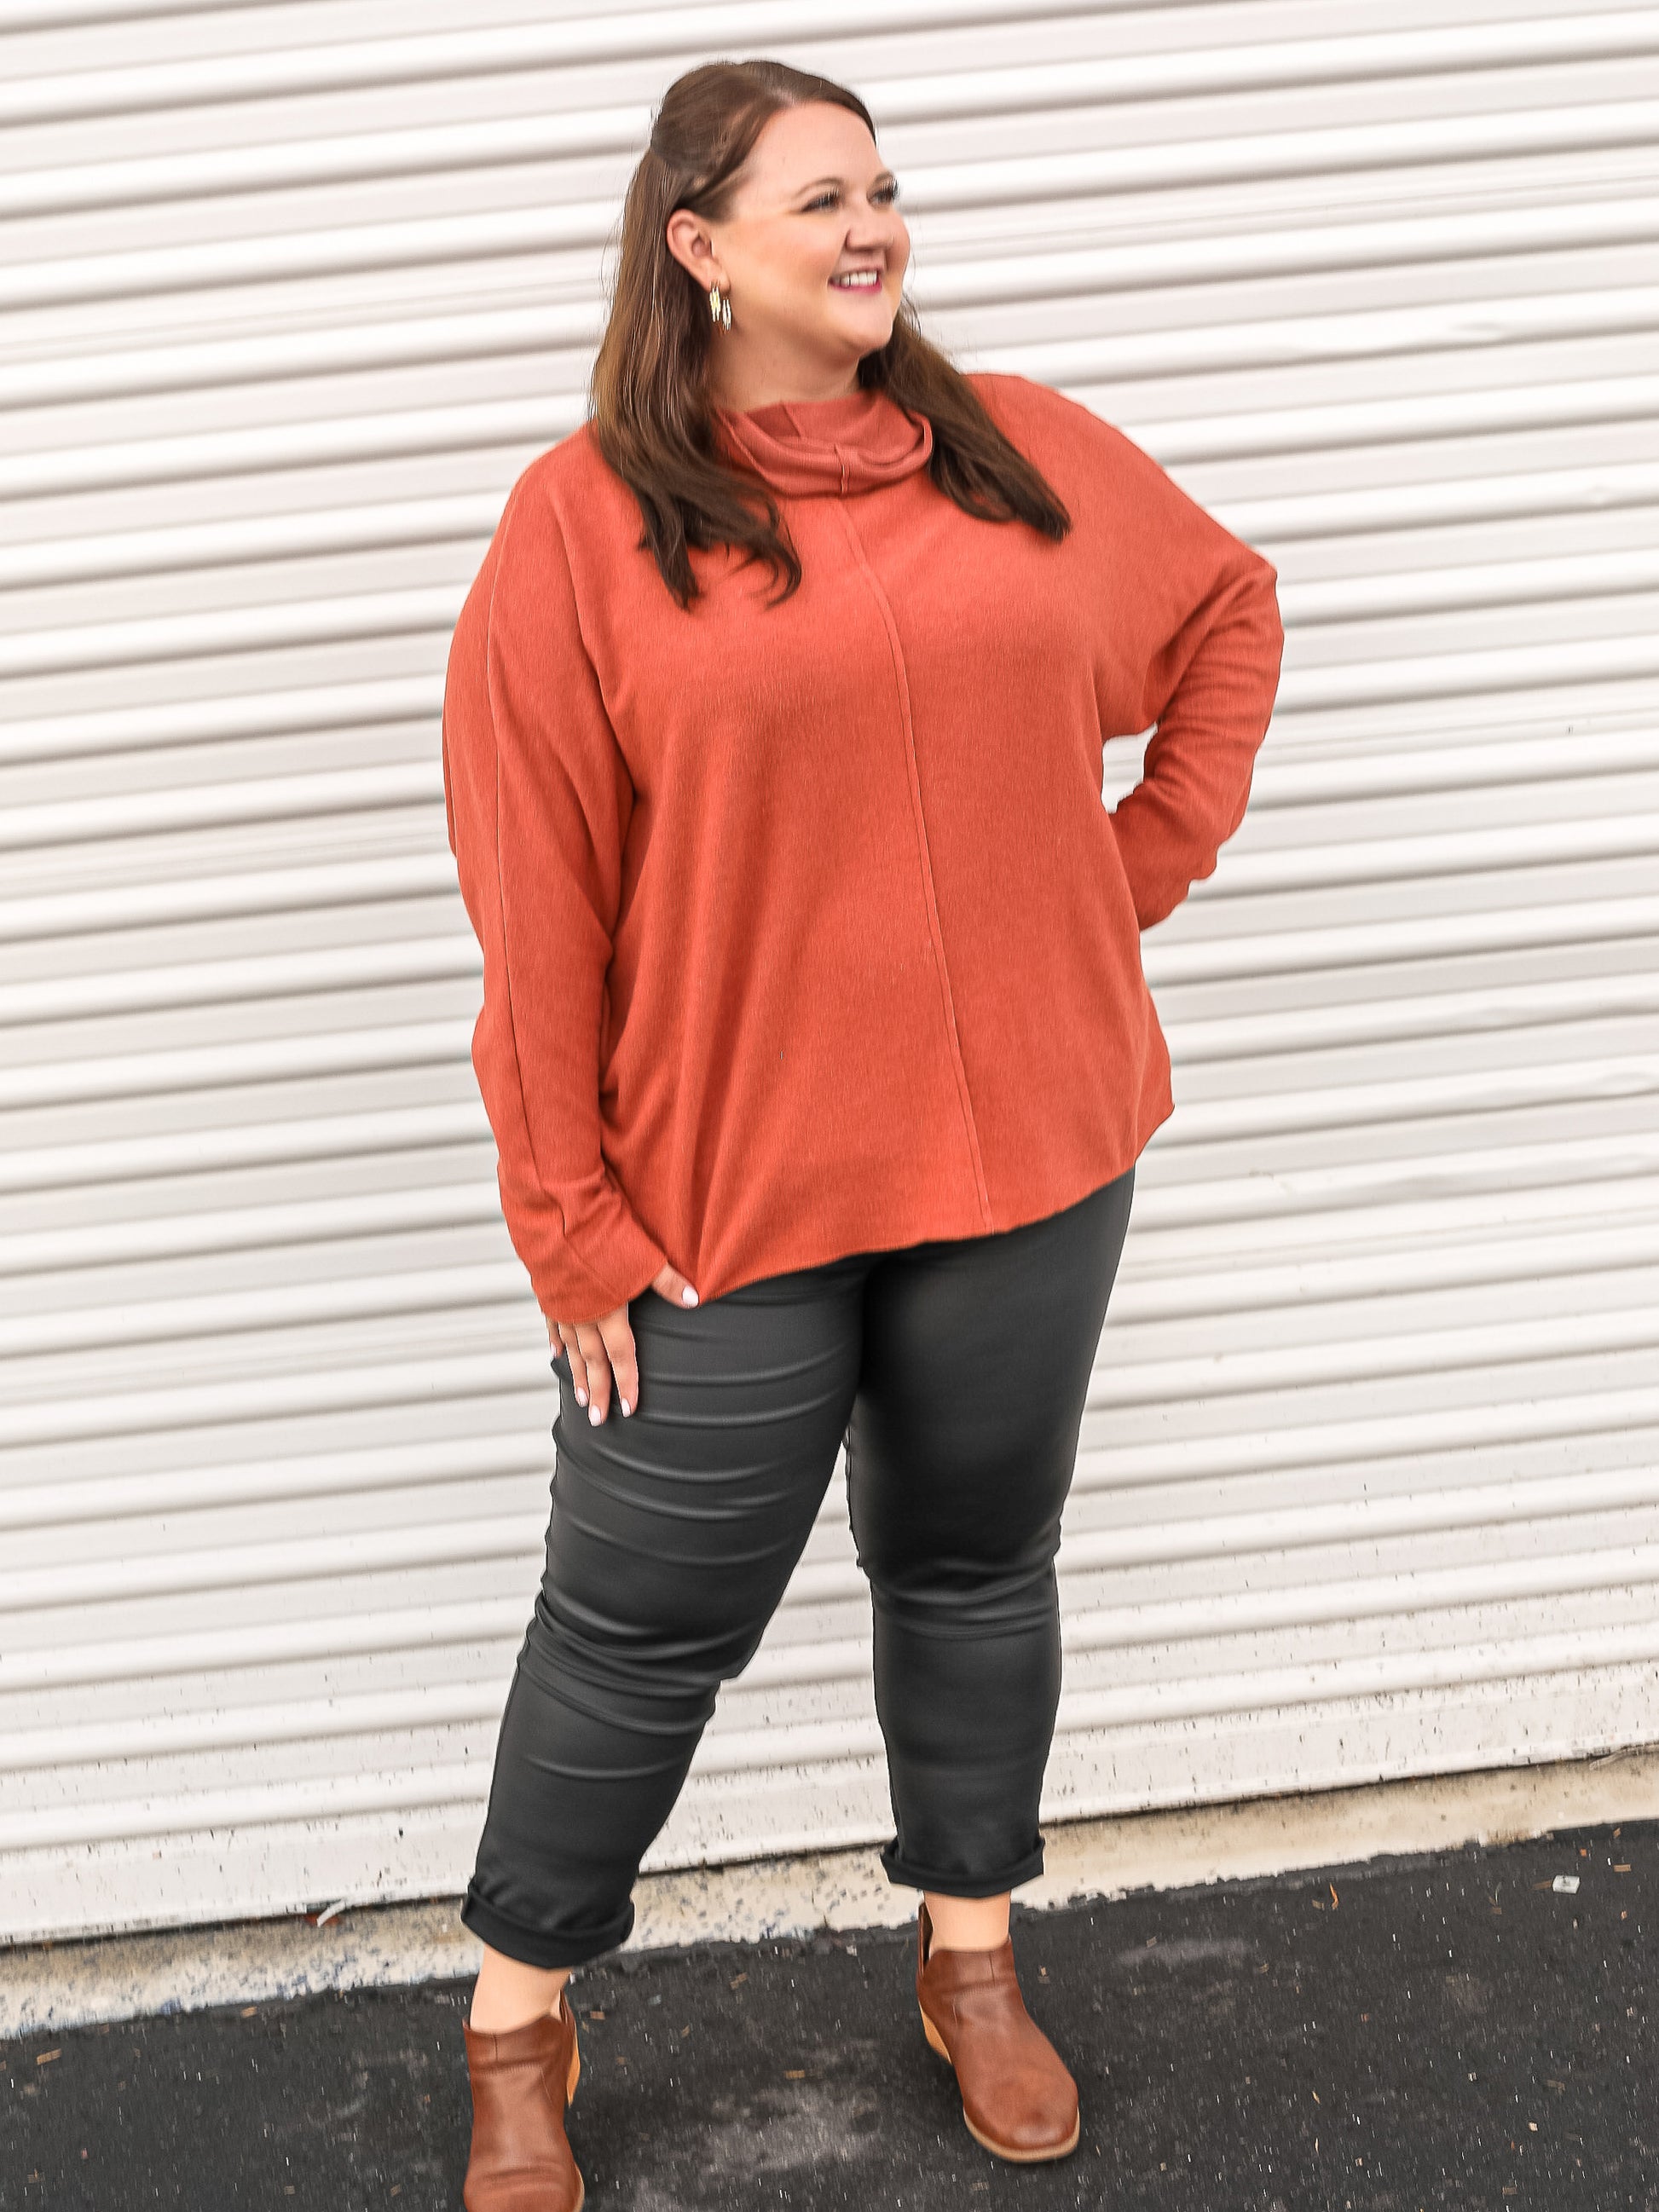 Full outfit styled with the metallic jeggings and orange sweater